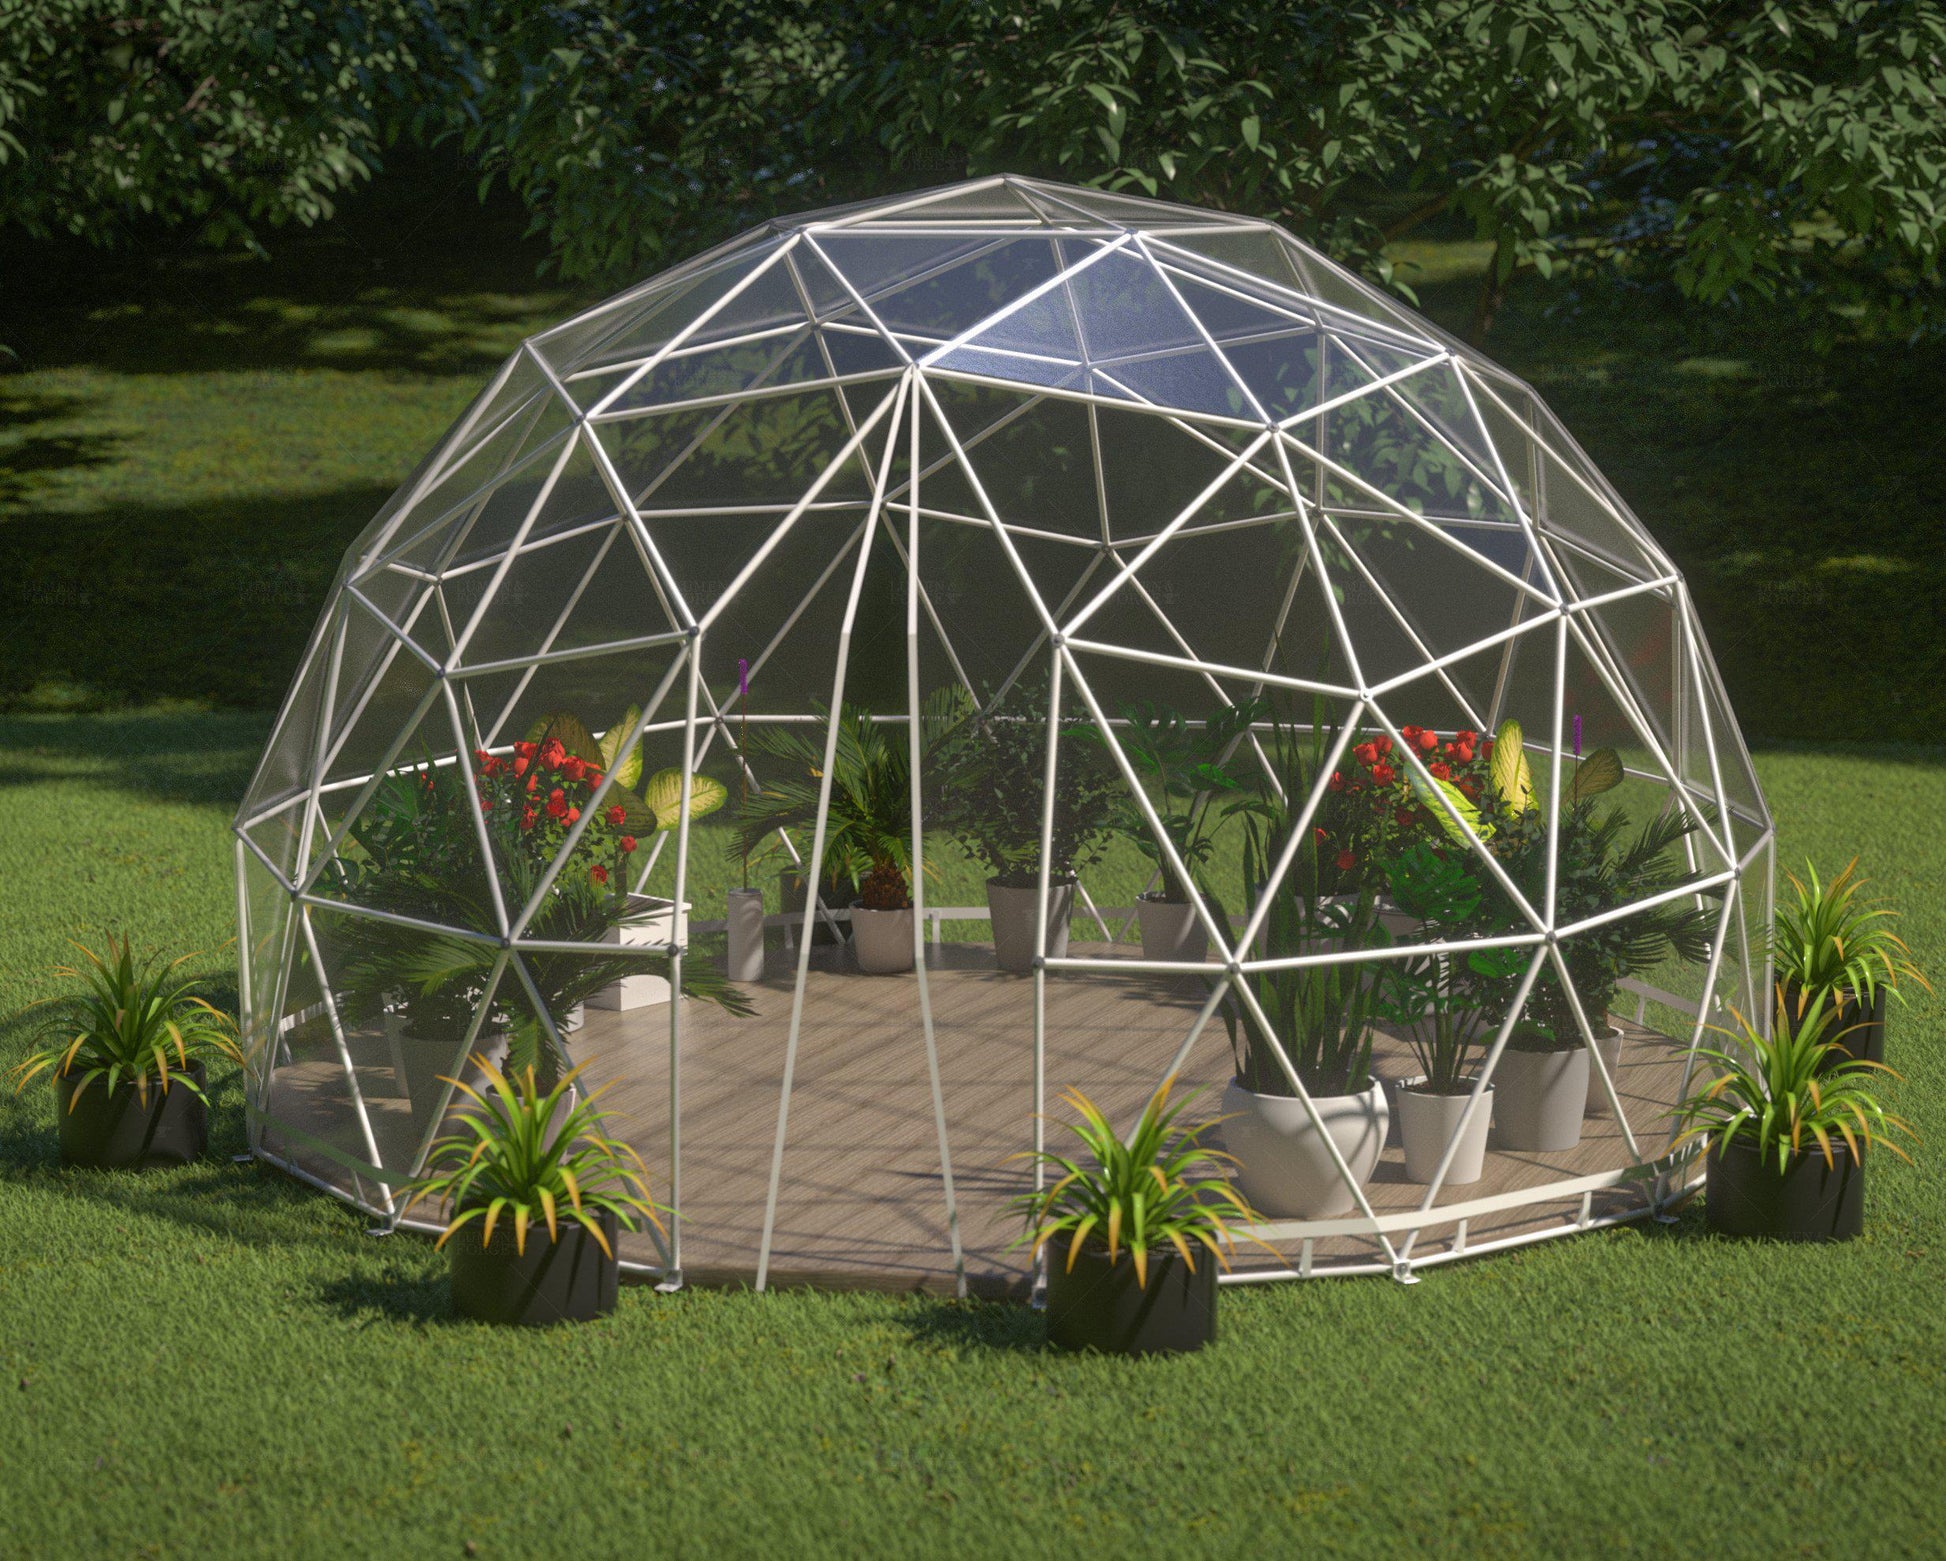 Aluminum Geodesic Domes - FORGE